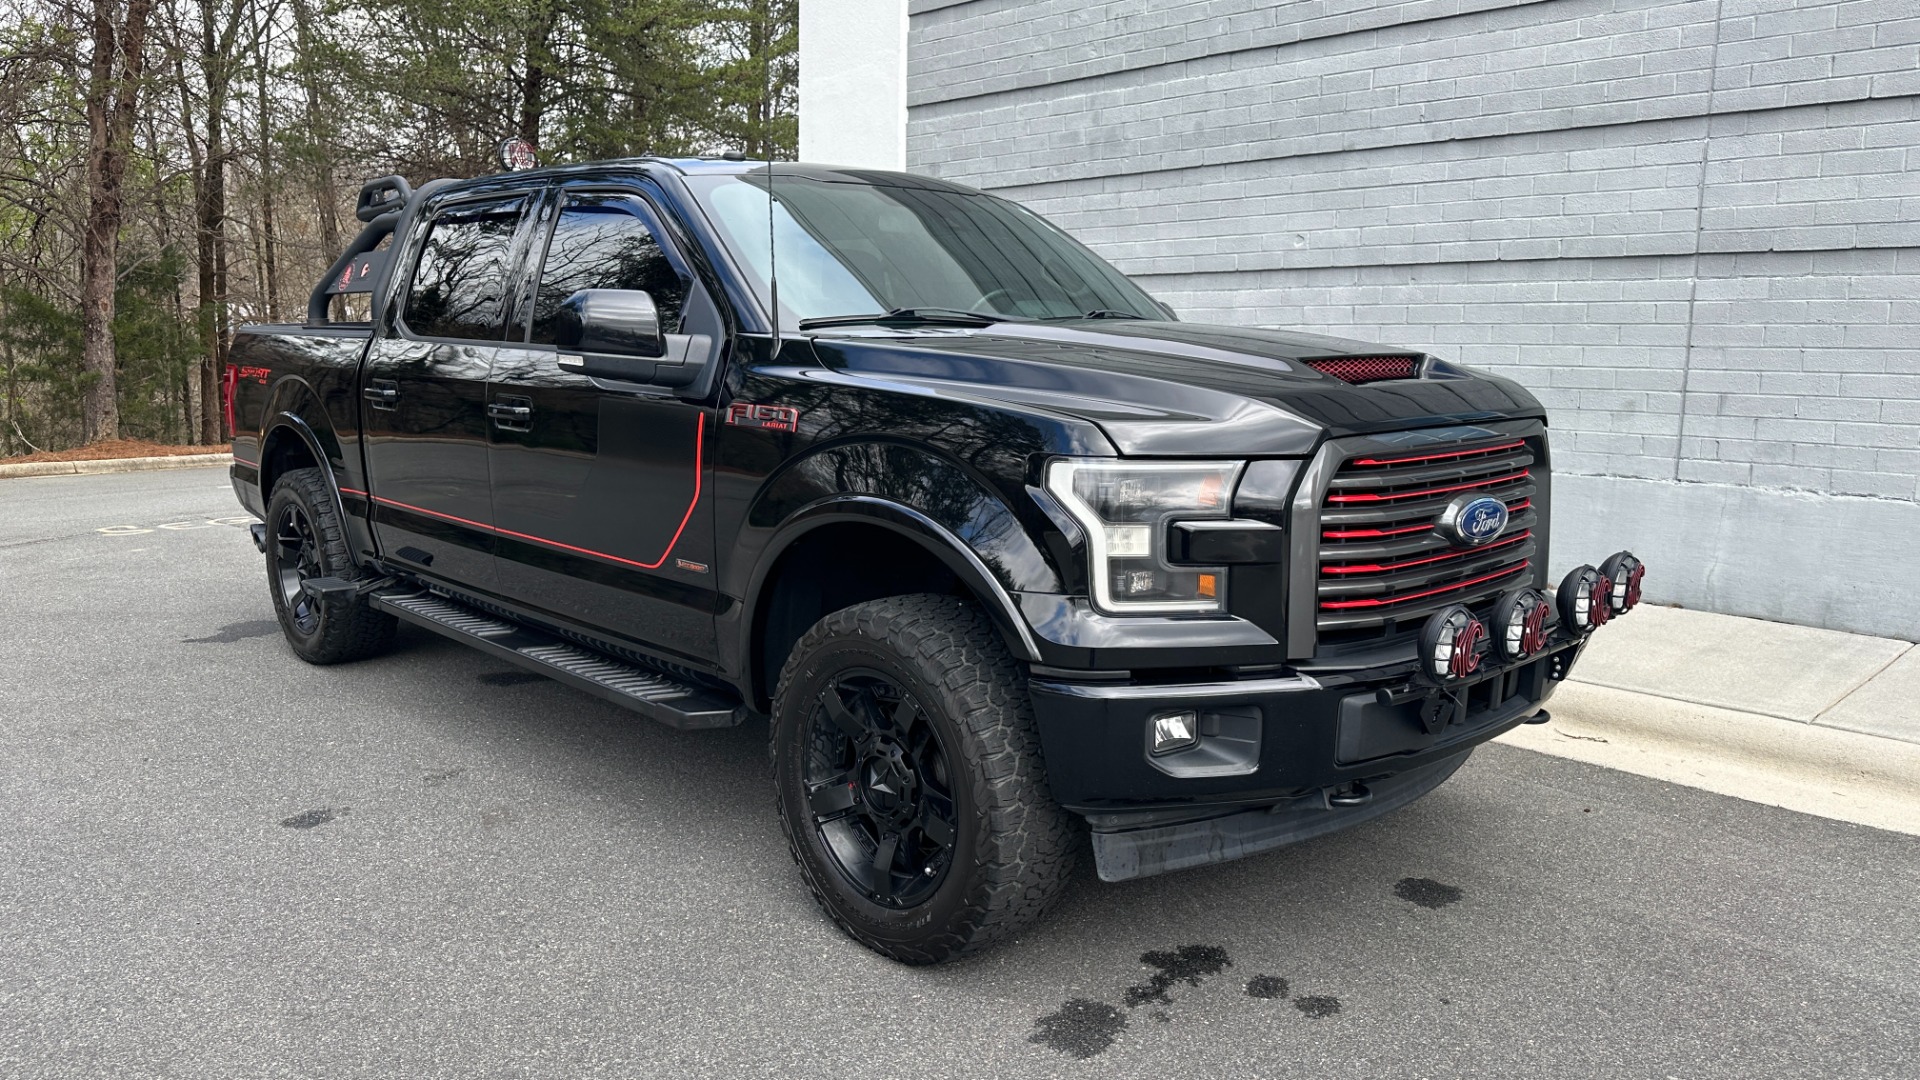 Used 2017 Ford F-150 LARIAT / SPORT EDITION / 4X4 / CREW CAB / UPGRADED WHEELS / BUMPERS / LIGHT for sale Sold at Formula Imports in Charlotte NC 28227 5